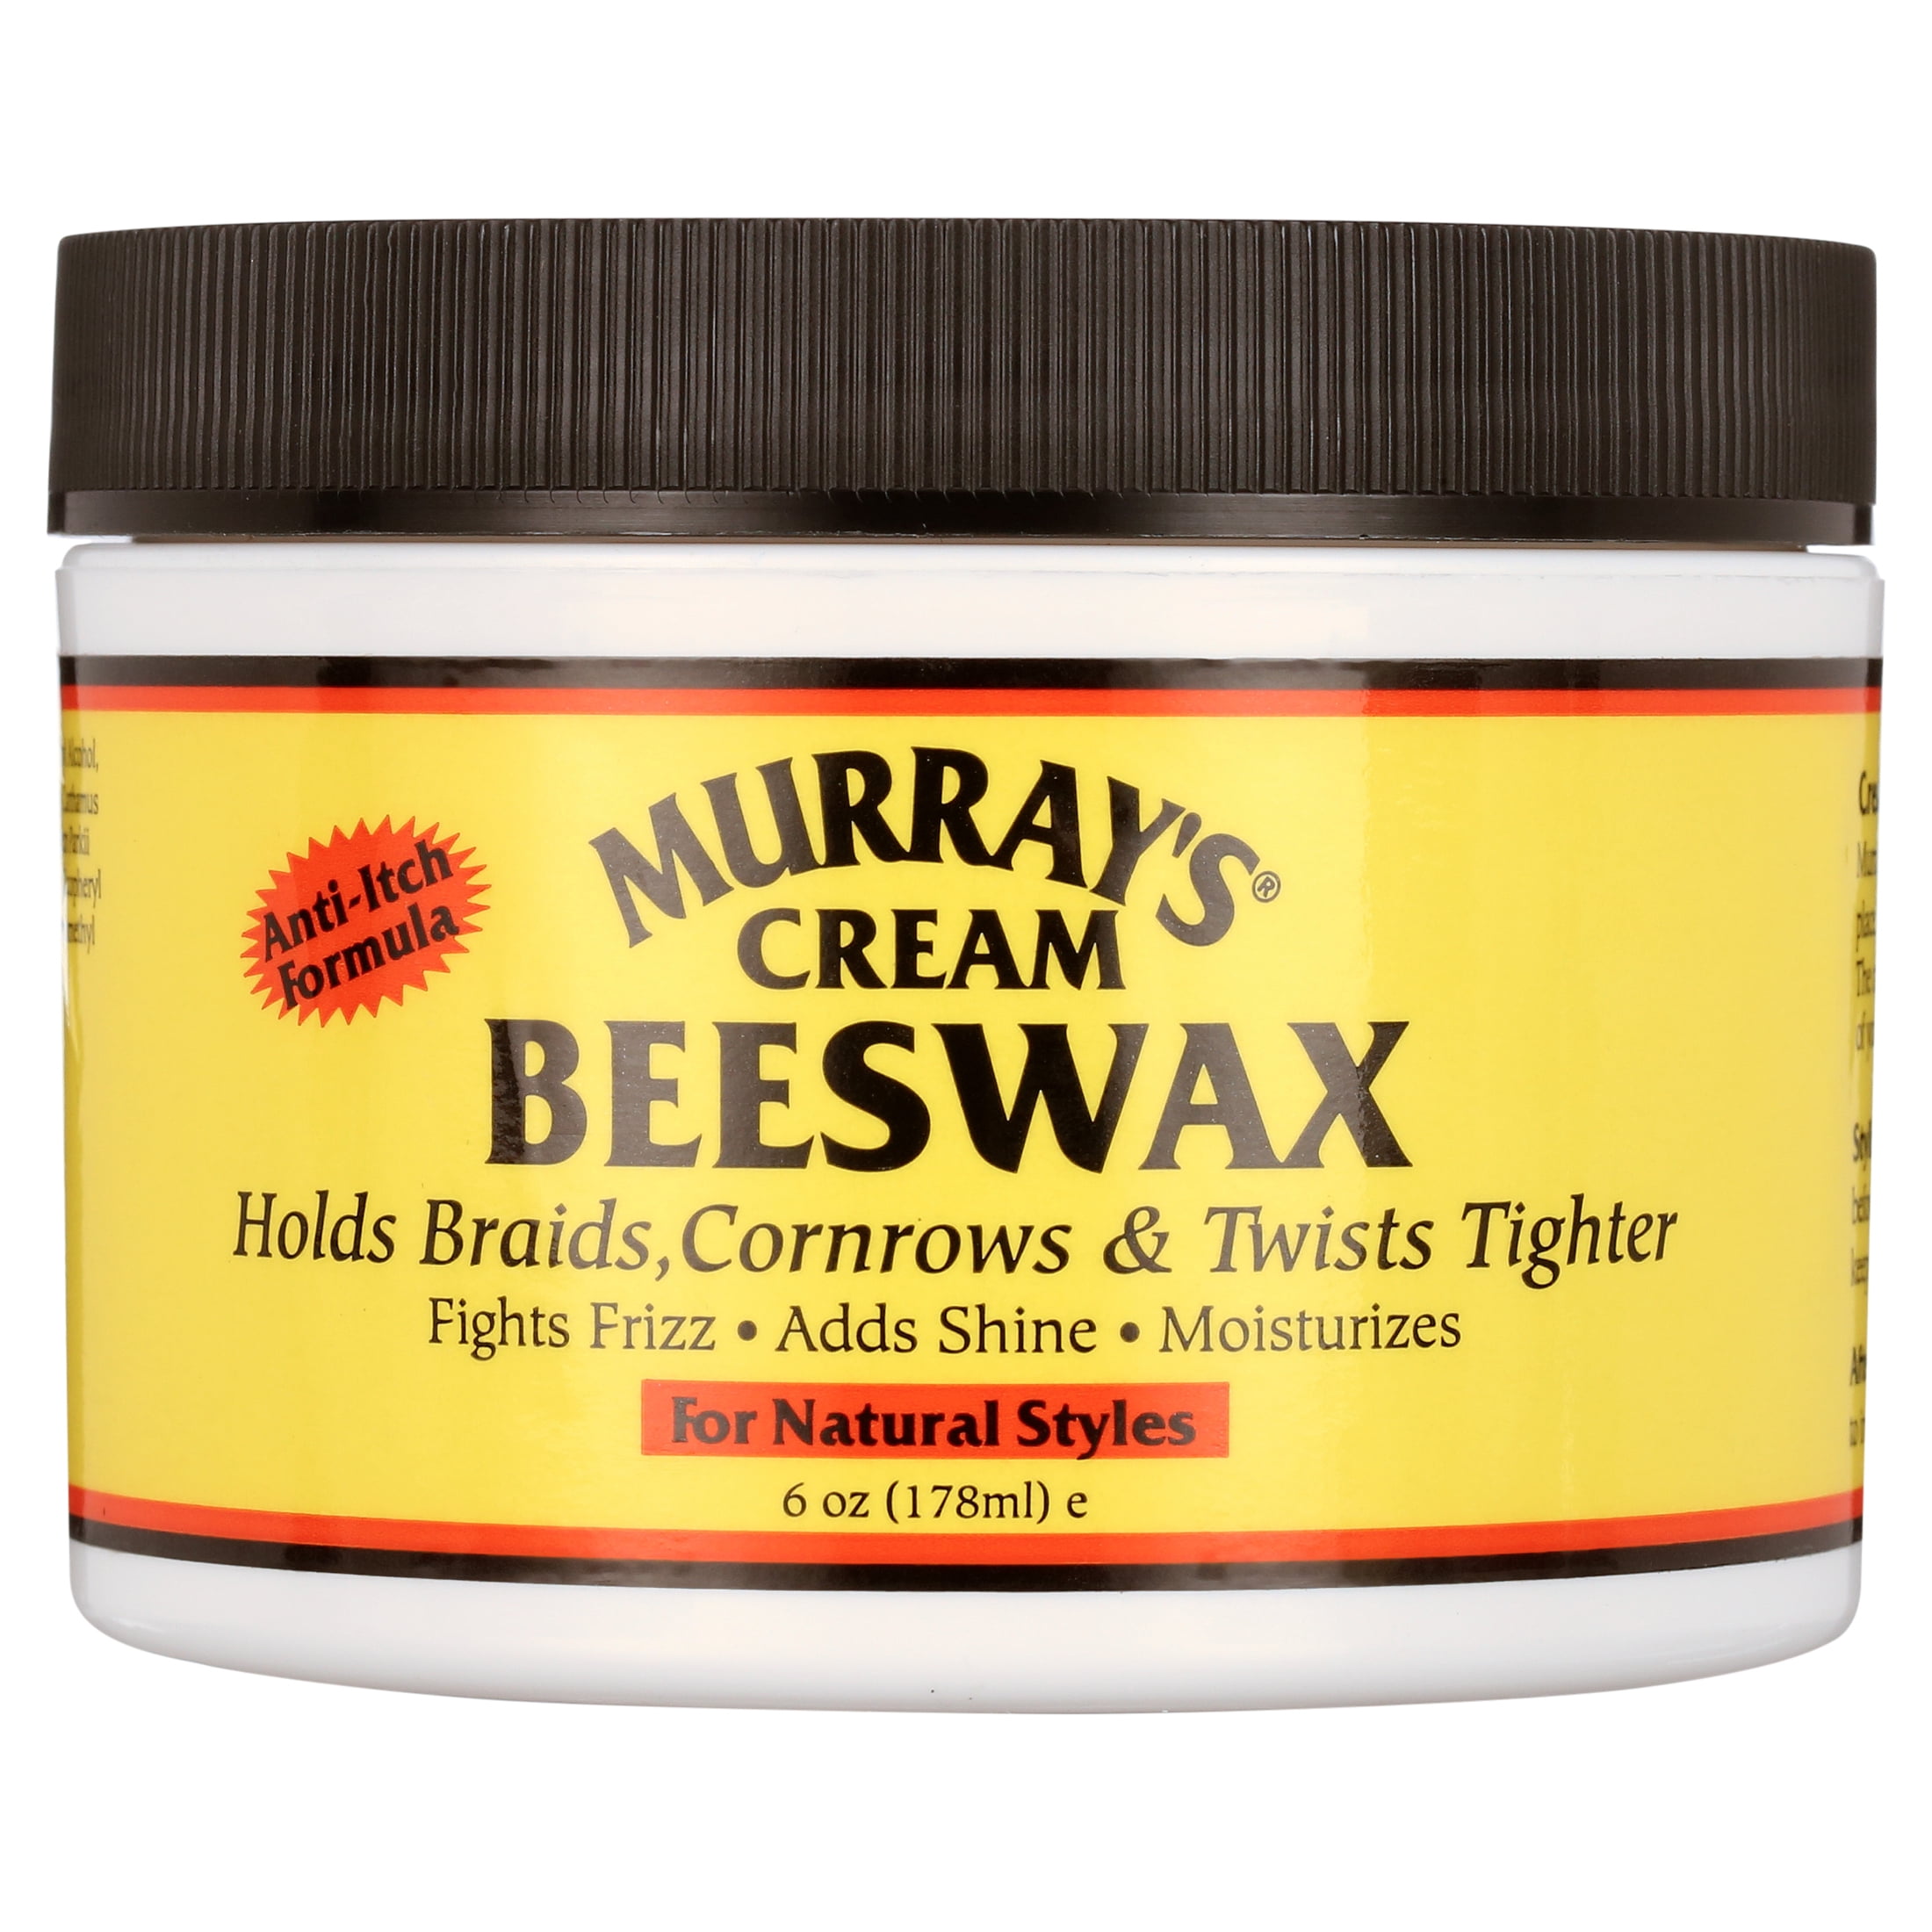 Murray's Beeswax Natural LOC Molding Paste 6 oz.